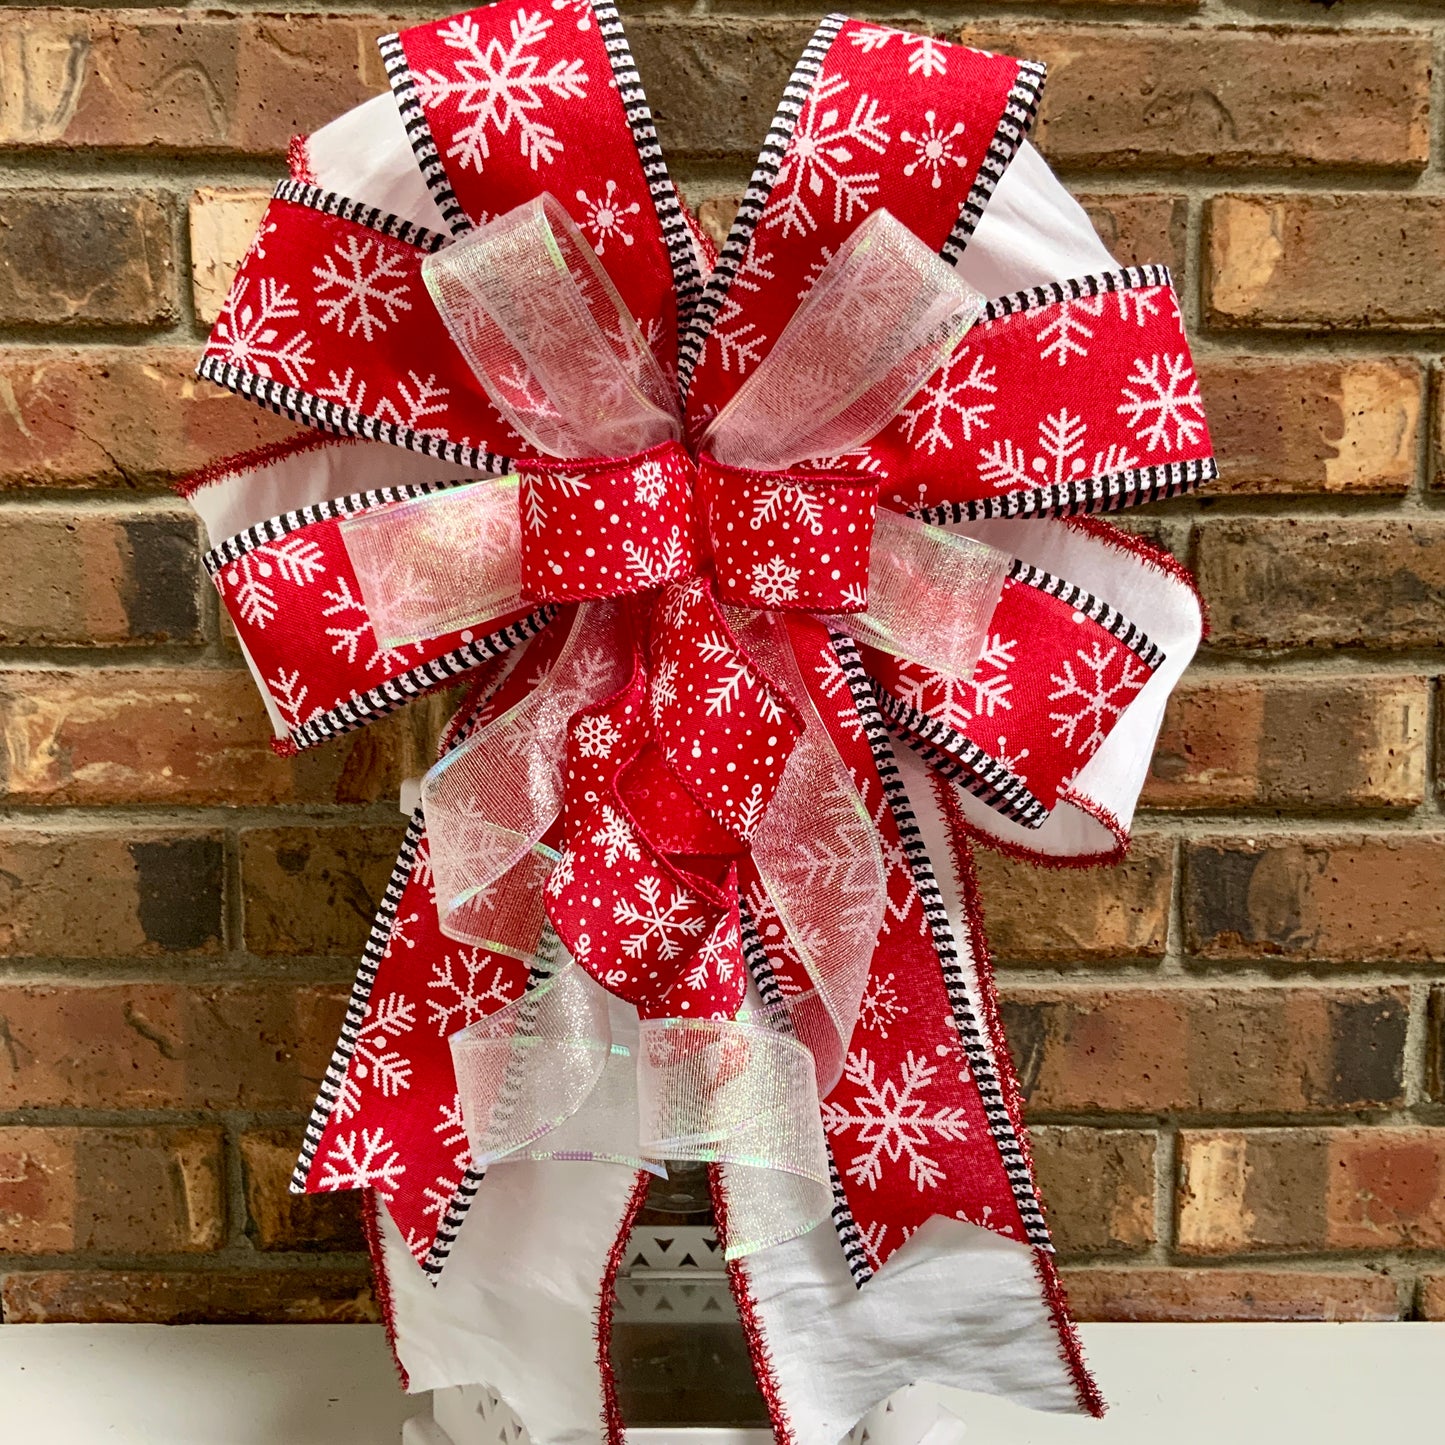 Blue and White Lantern Bow, Blue Winter Christmas Decor, Winter Holiday Bow, Snowflake Bow, Winter Lantern Bow, Winter Mailbox Bow, Winter Not Christmas Decor